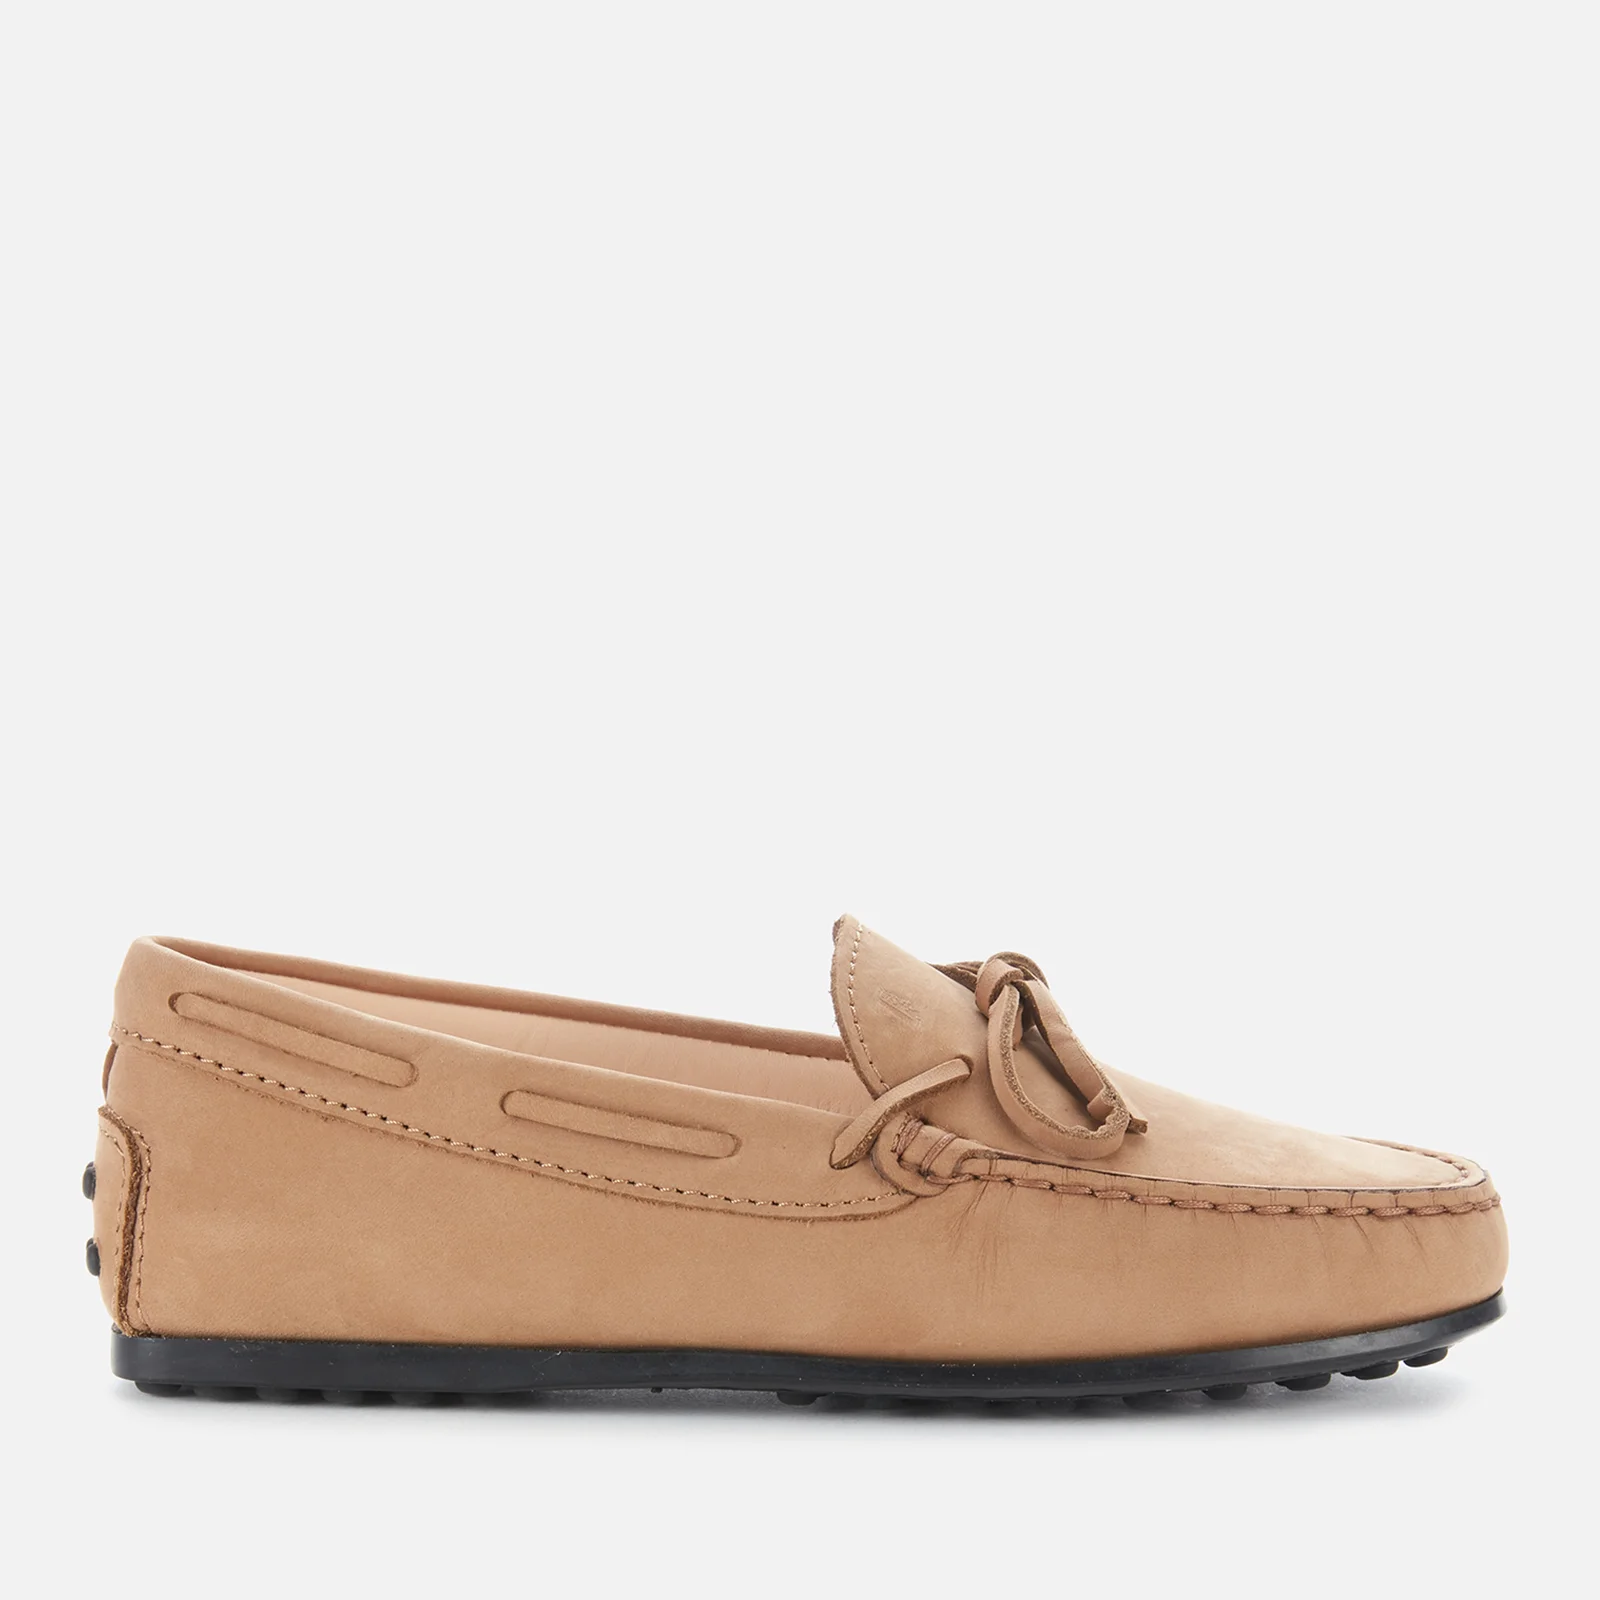 Tods Toddlers' Suede Loafers - Brown Image 1